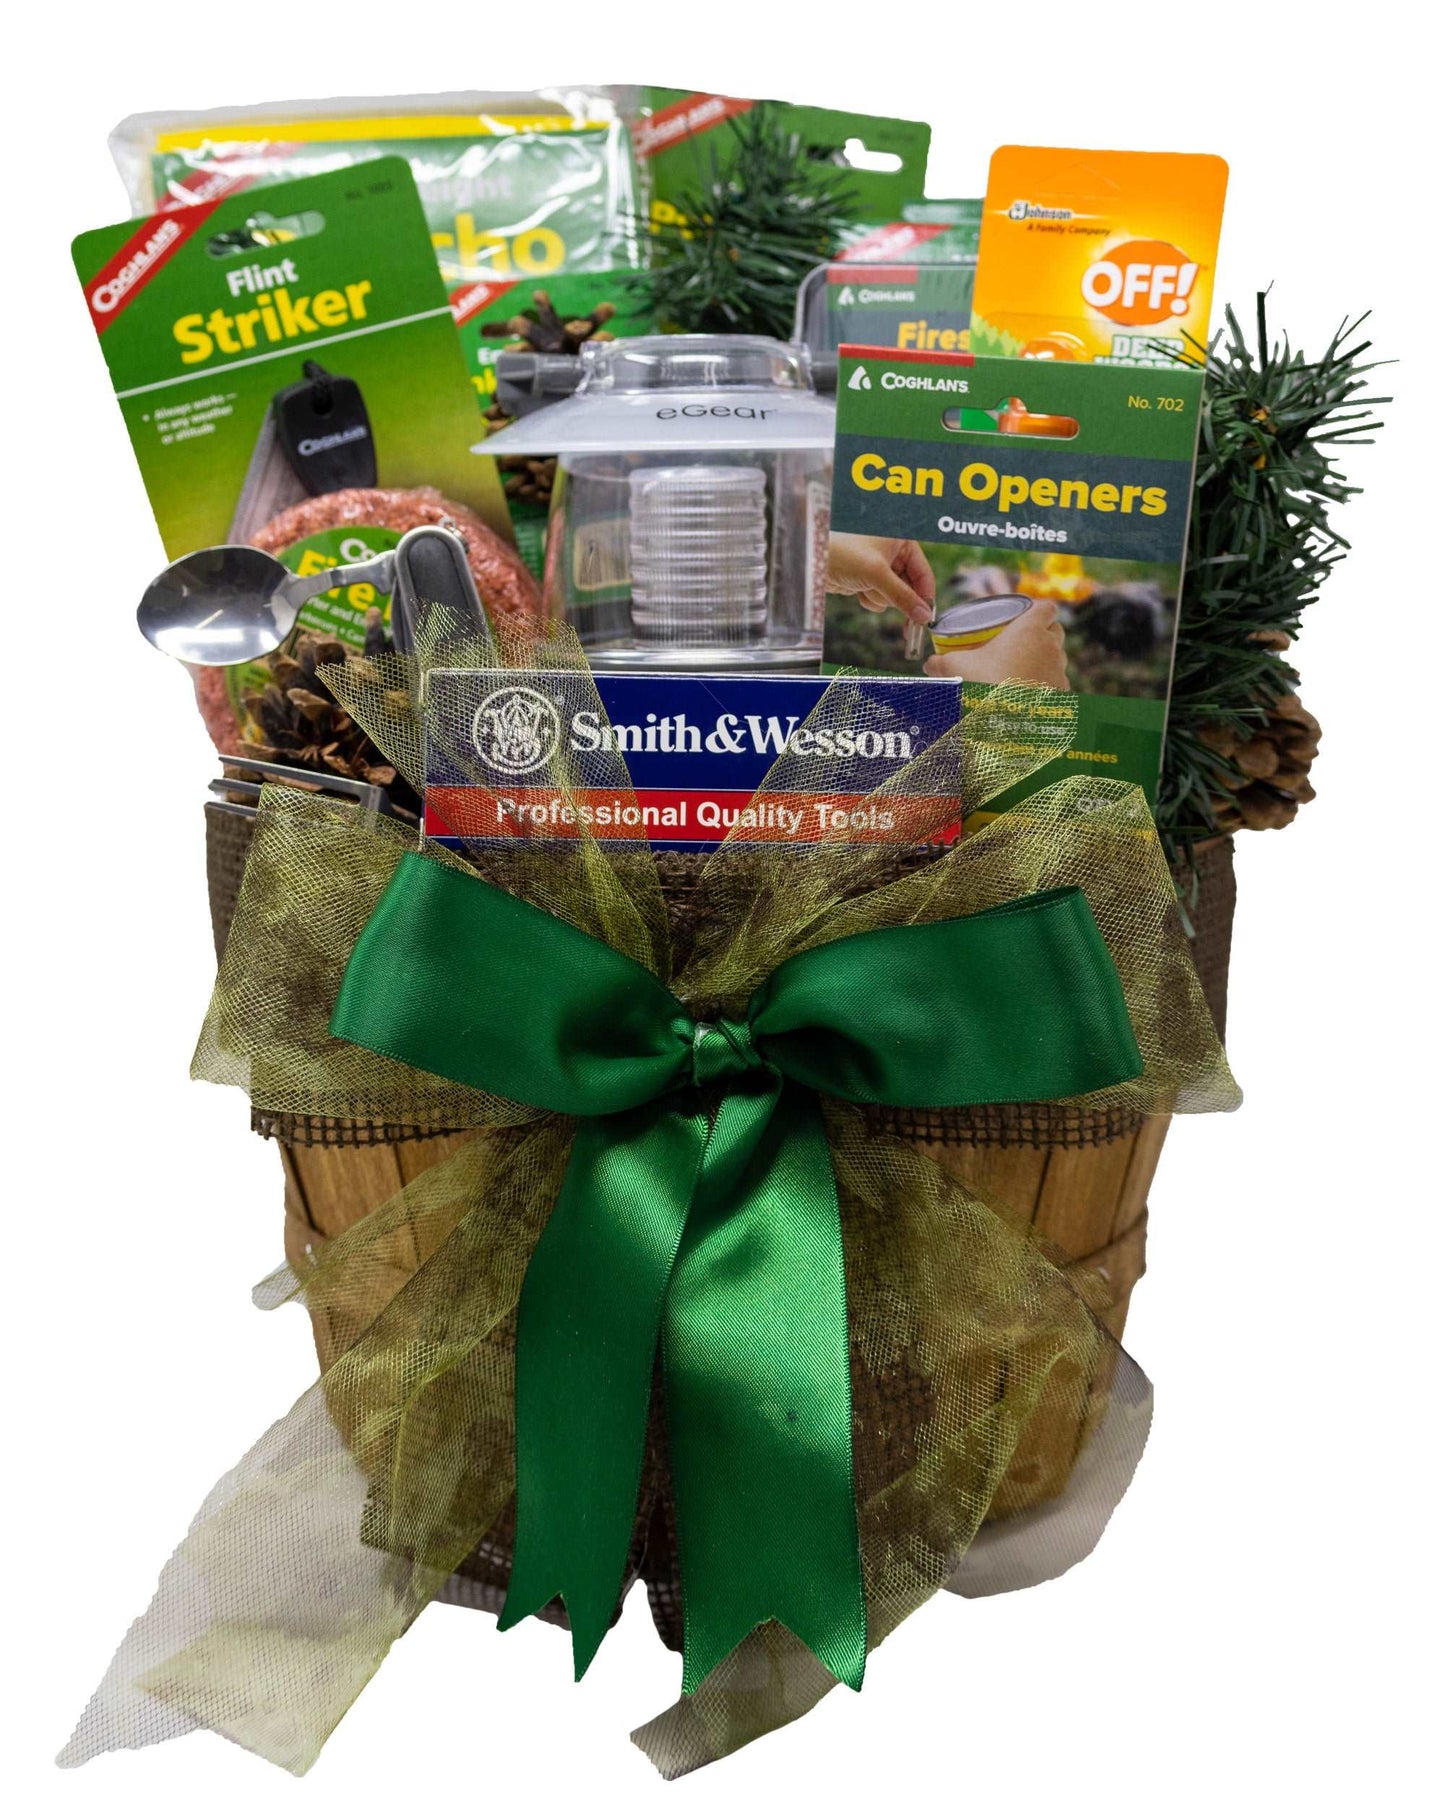 Camping Essentials Gift Basket  Gifts for Outdoorsmen – Powers Handmade  Gifts